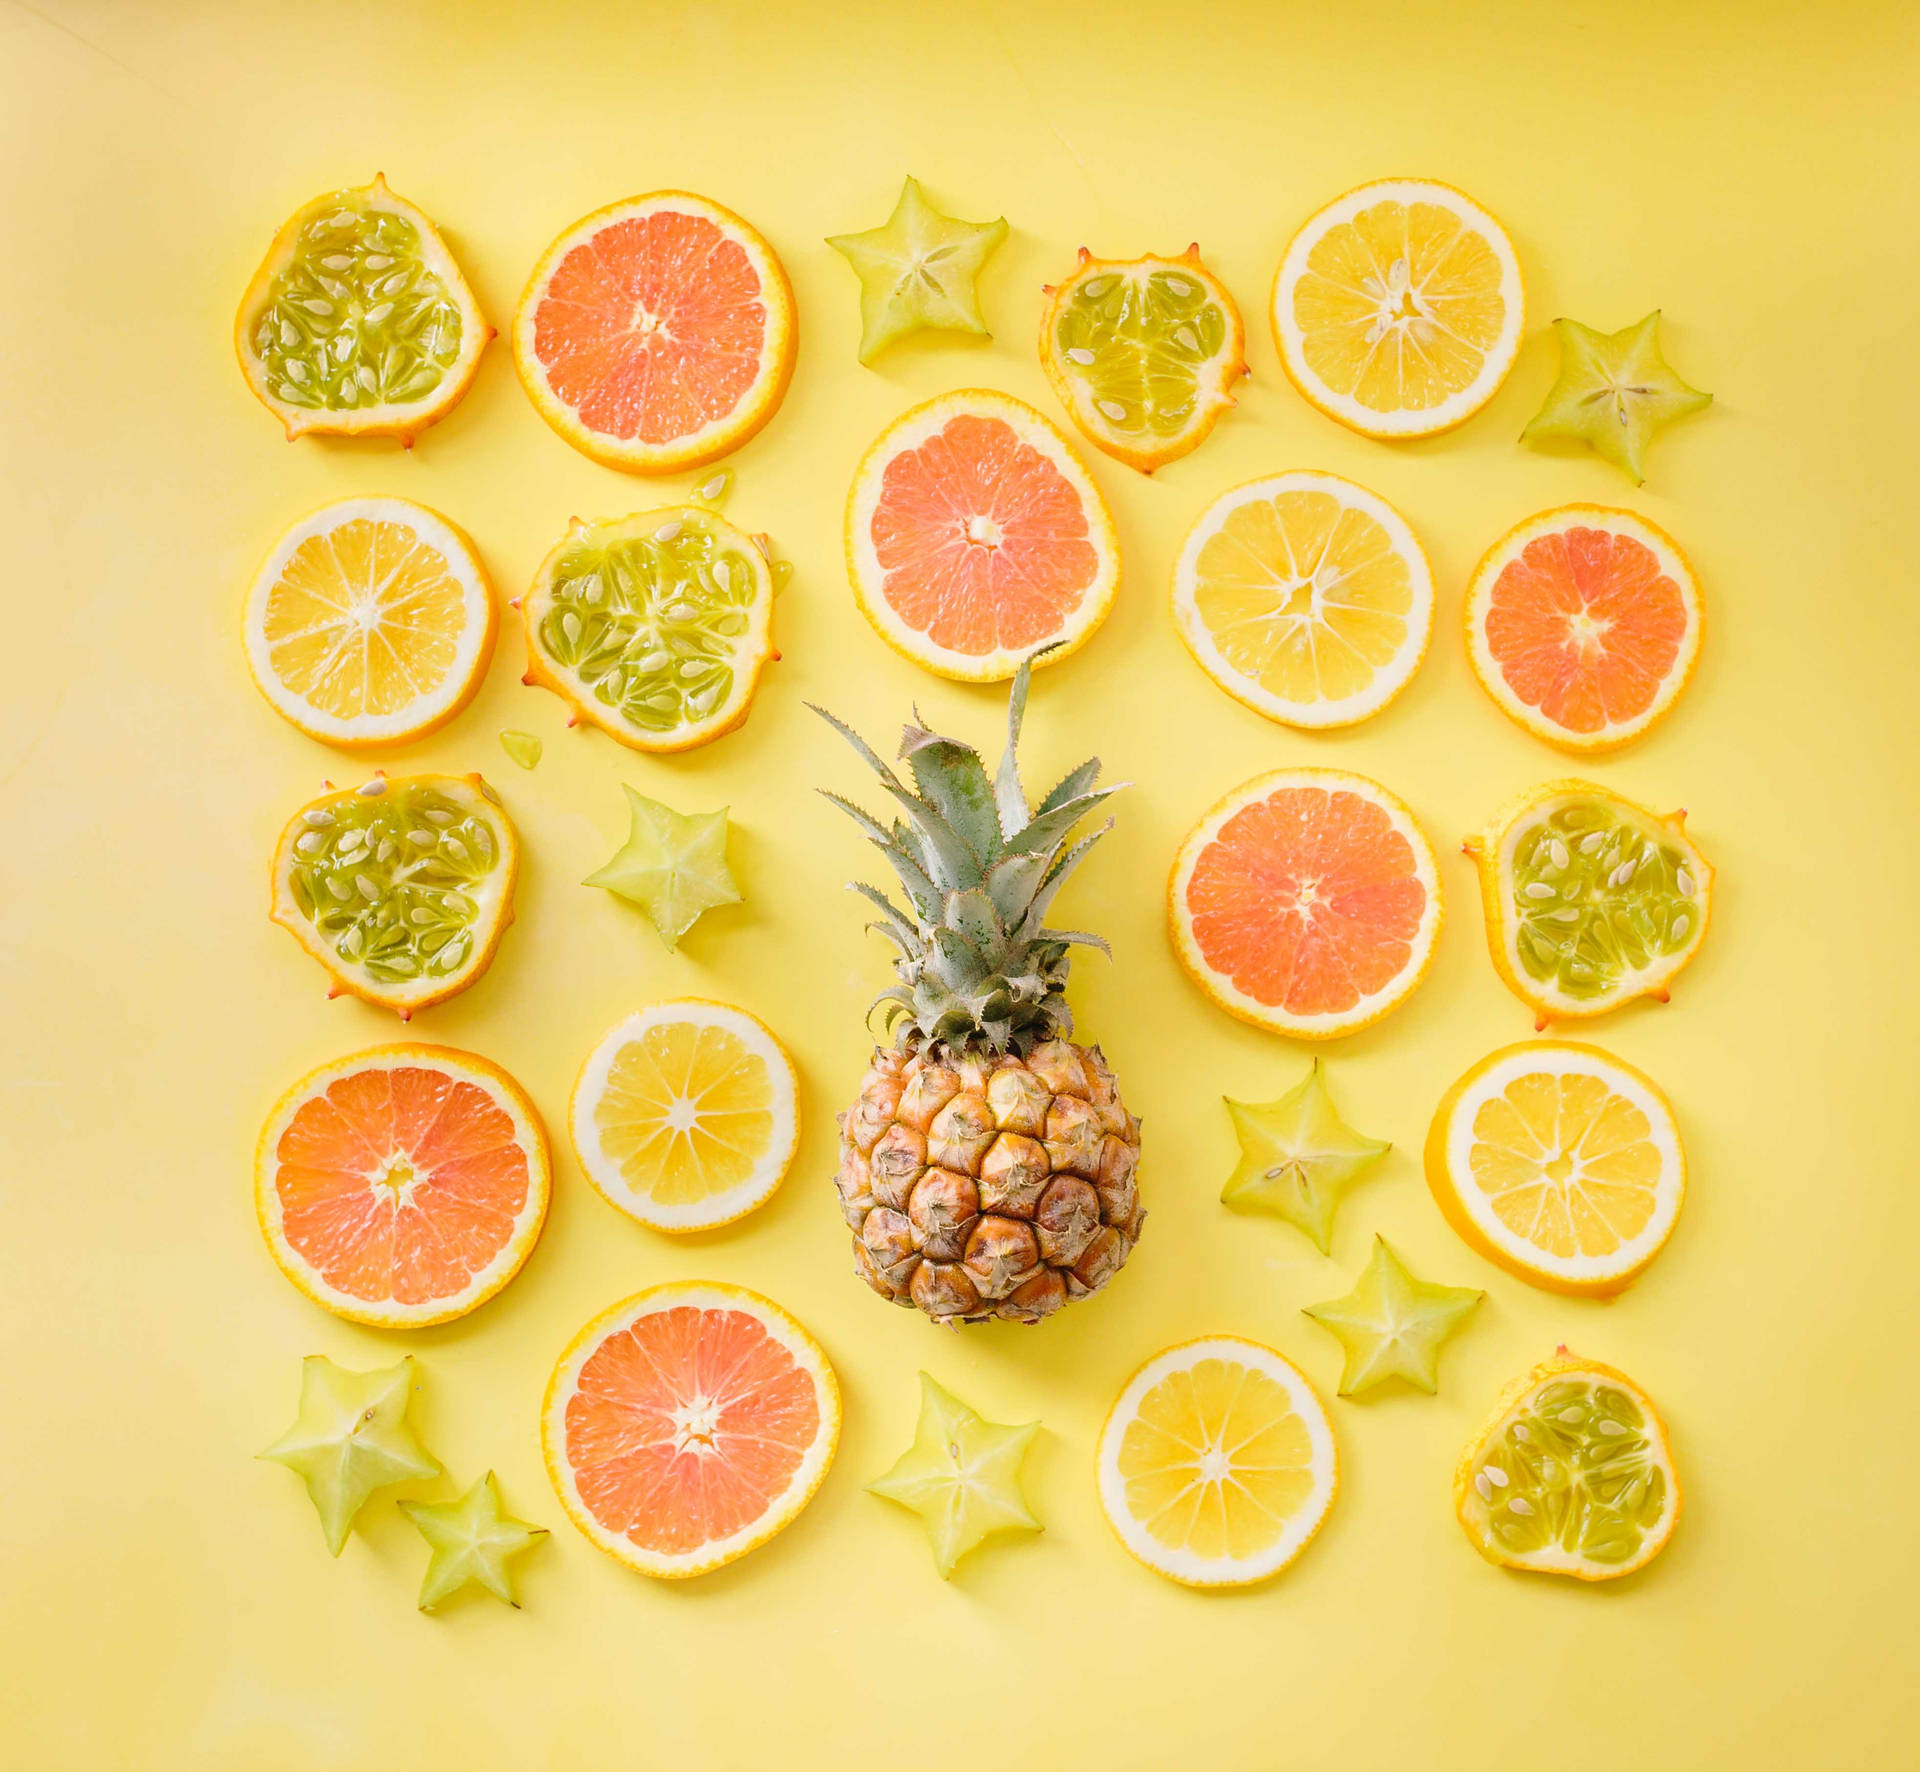 Sweet And Tangy Pineapple And Citrus Treat Background